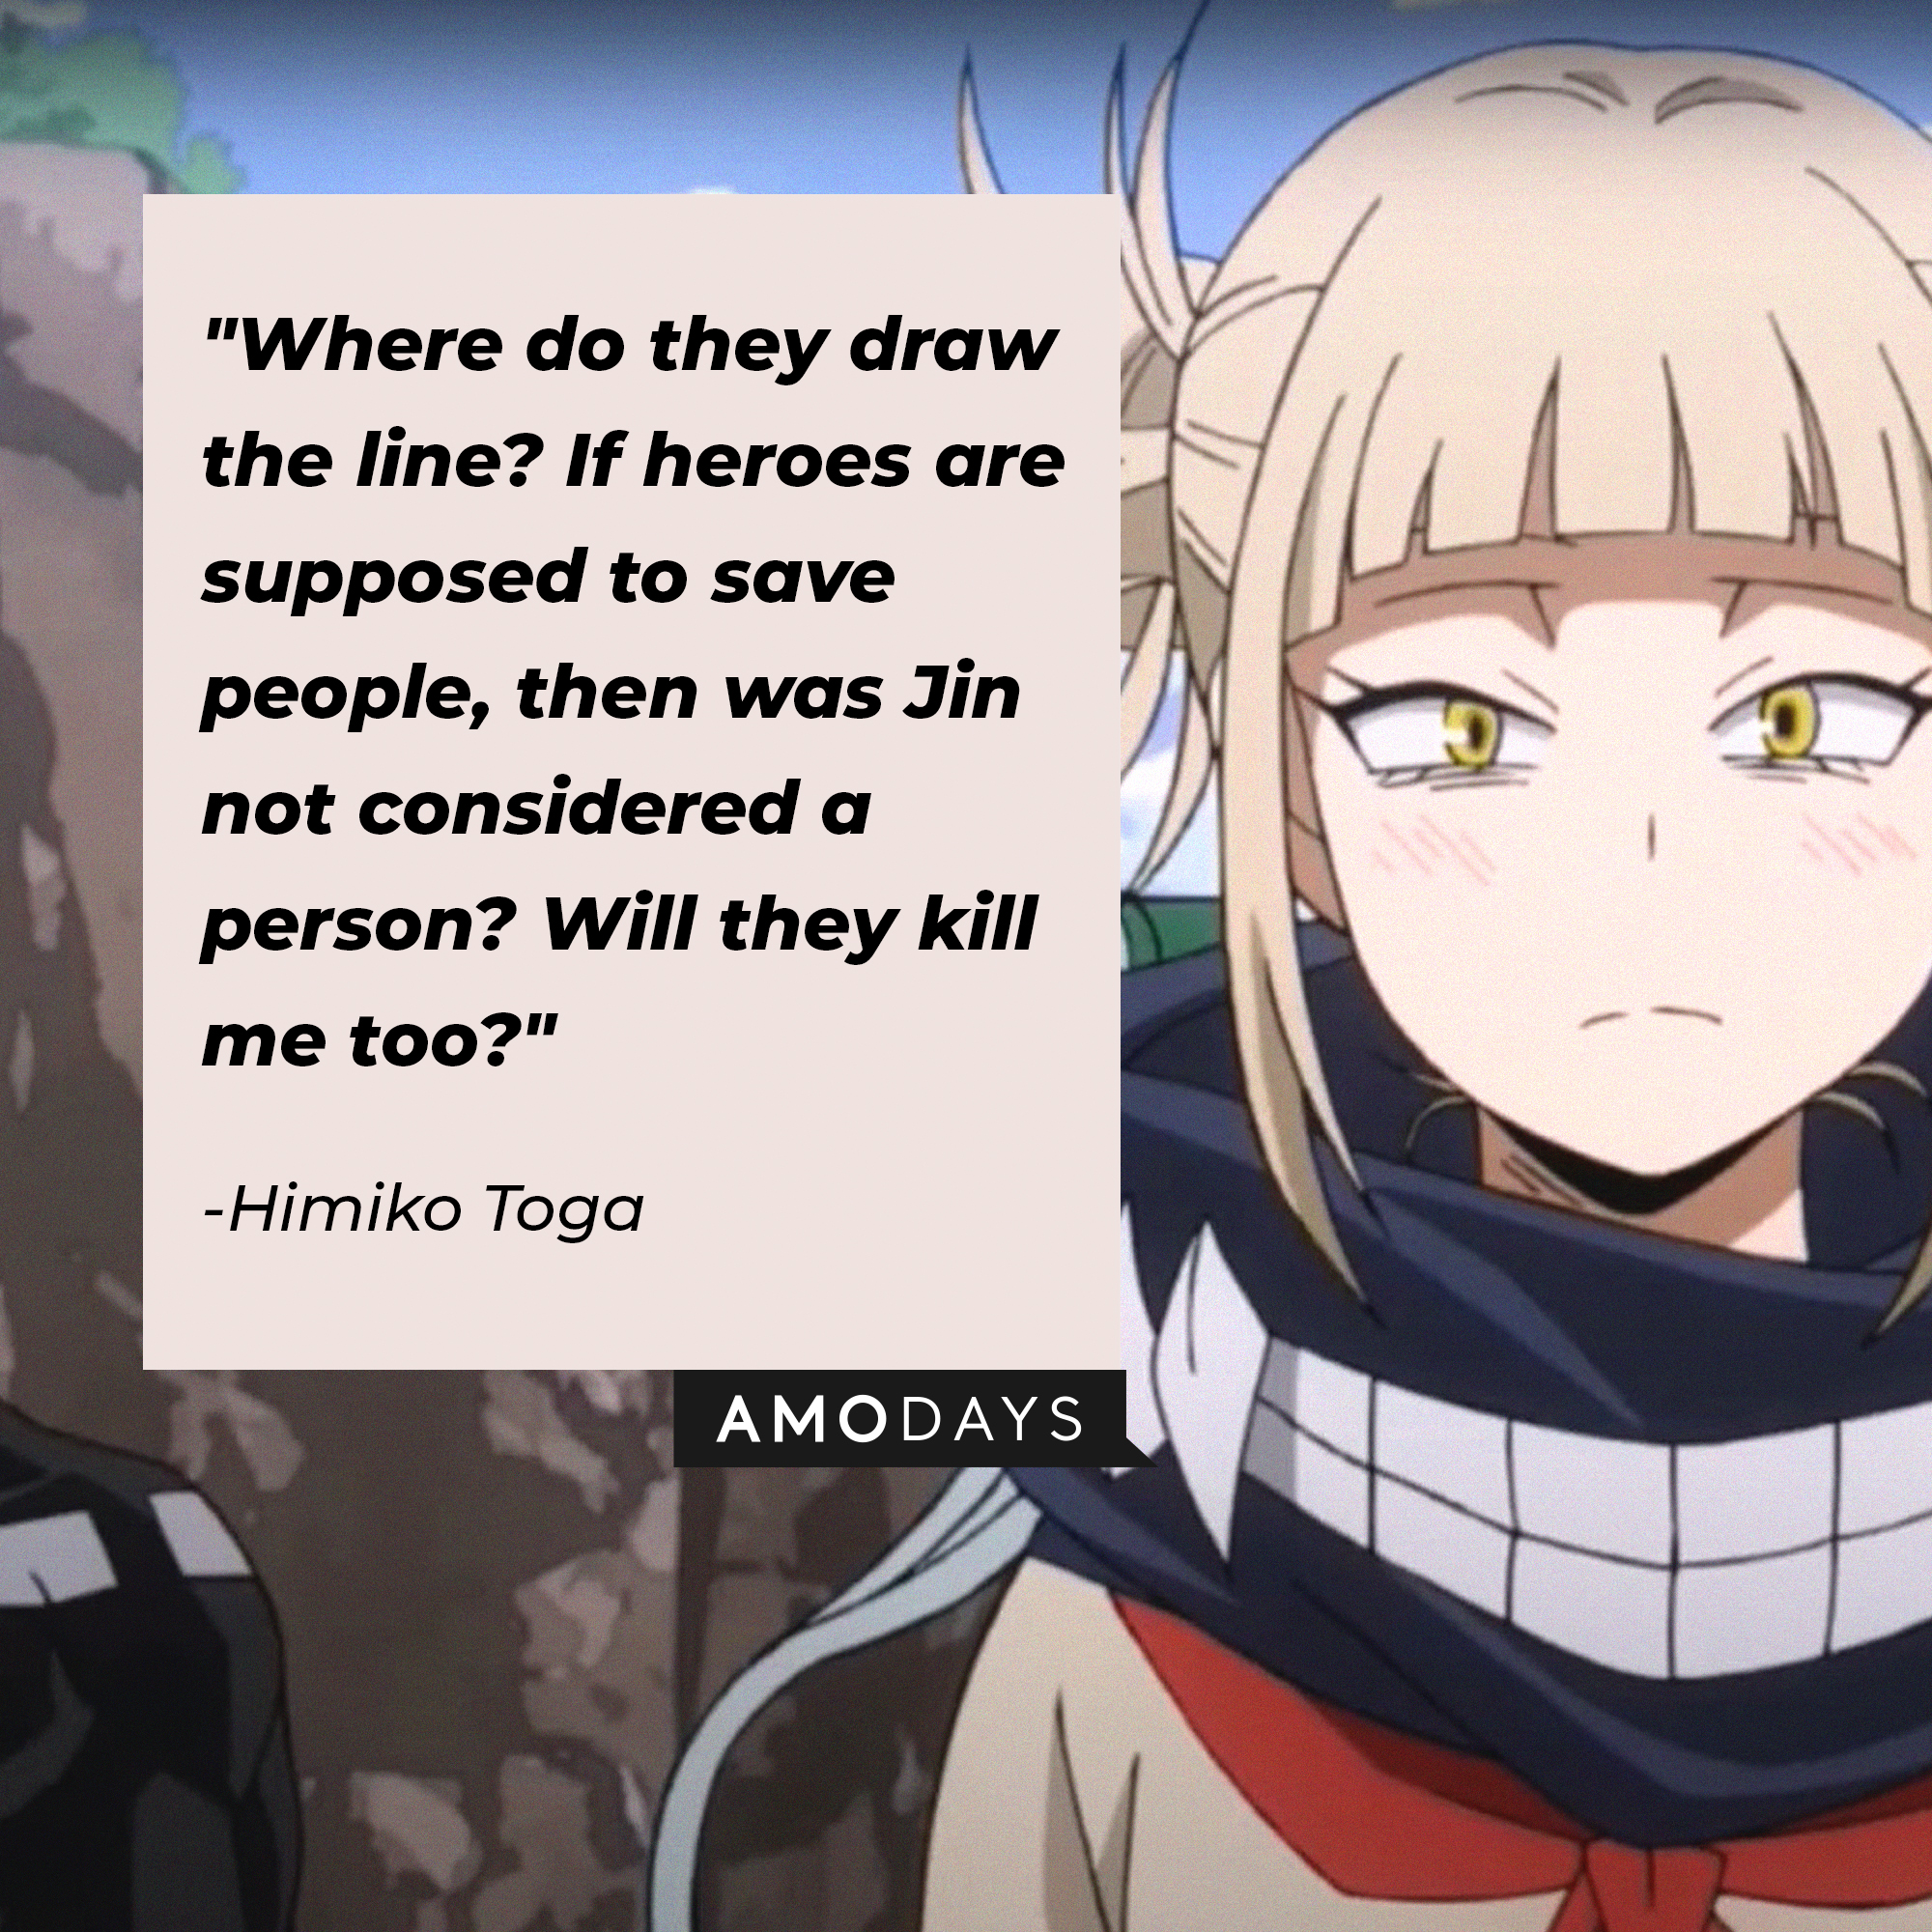 Himiko Toga’s quote: "Where do they draw the line? If heroes are supposed to save people, then was Jin not considered a person? Will they kill me too?" | Image: AmoDays